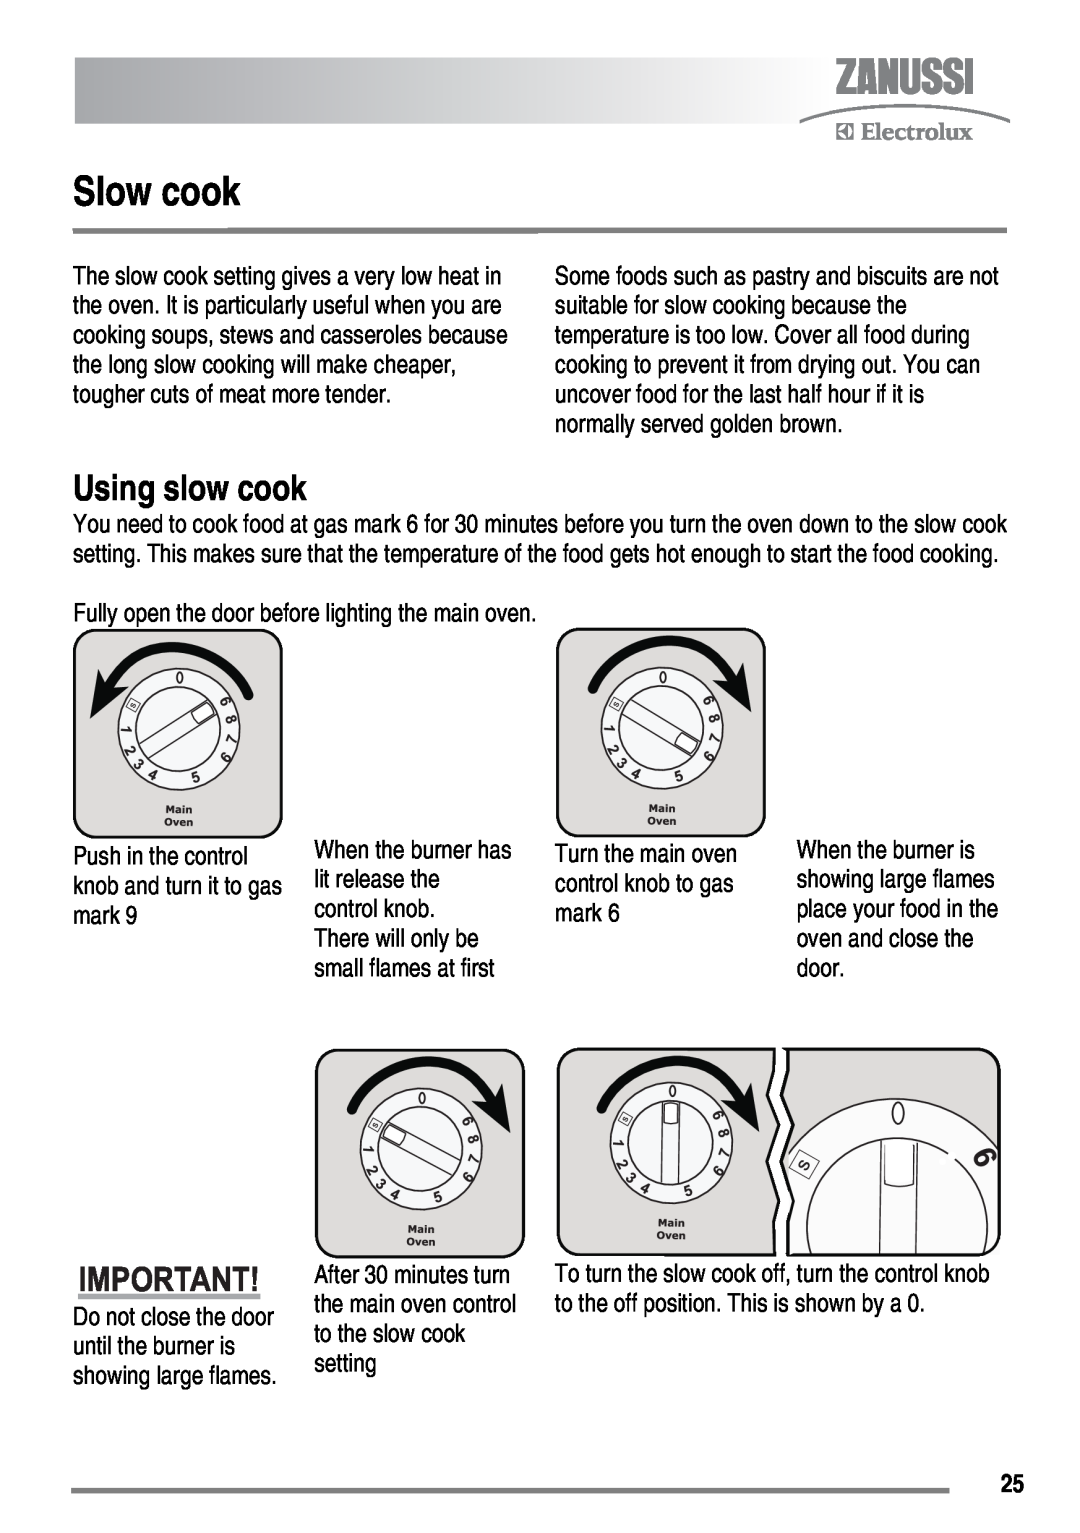 Zanussi FH10 user manual Slow cook, Using slow cook, After 30 minutes turn the main oven control to the slow cook setting 